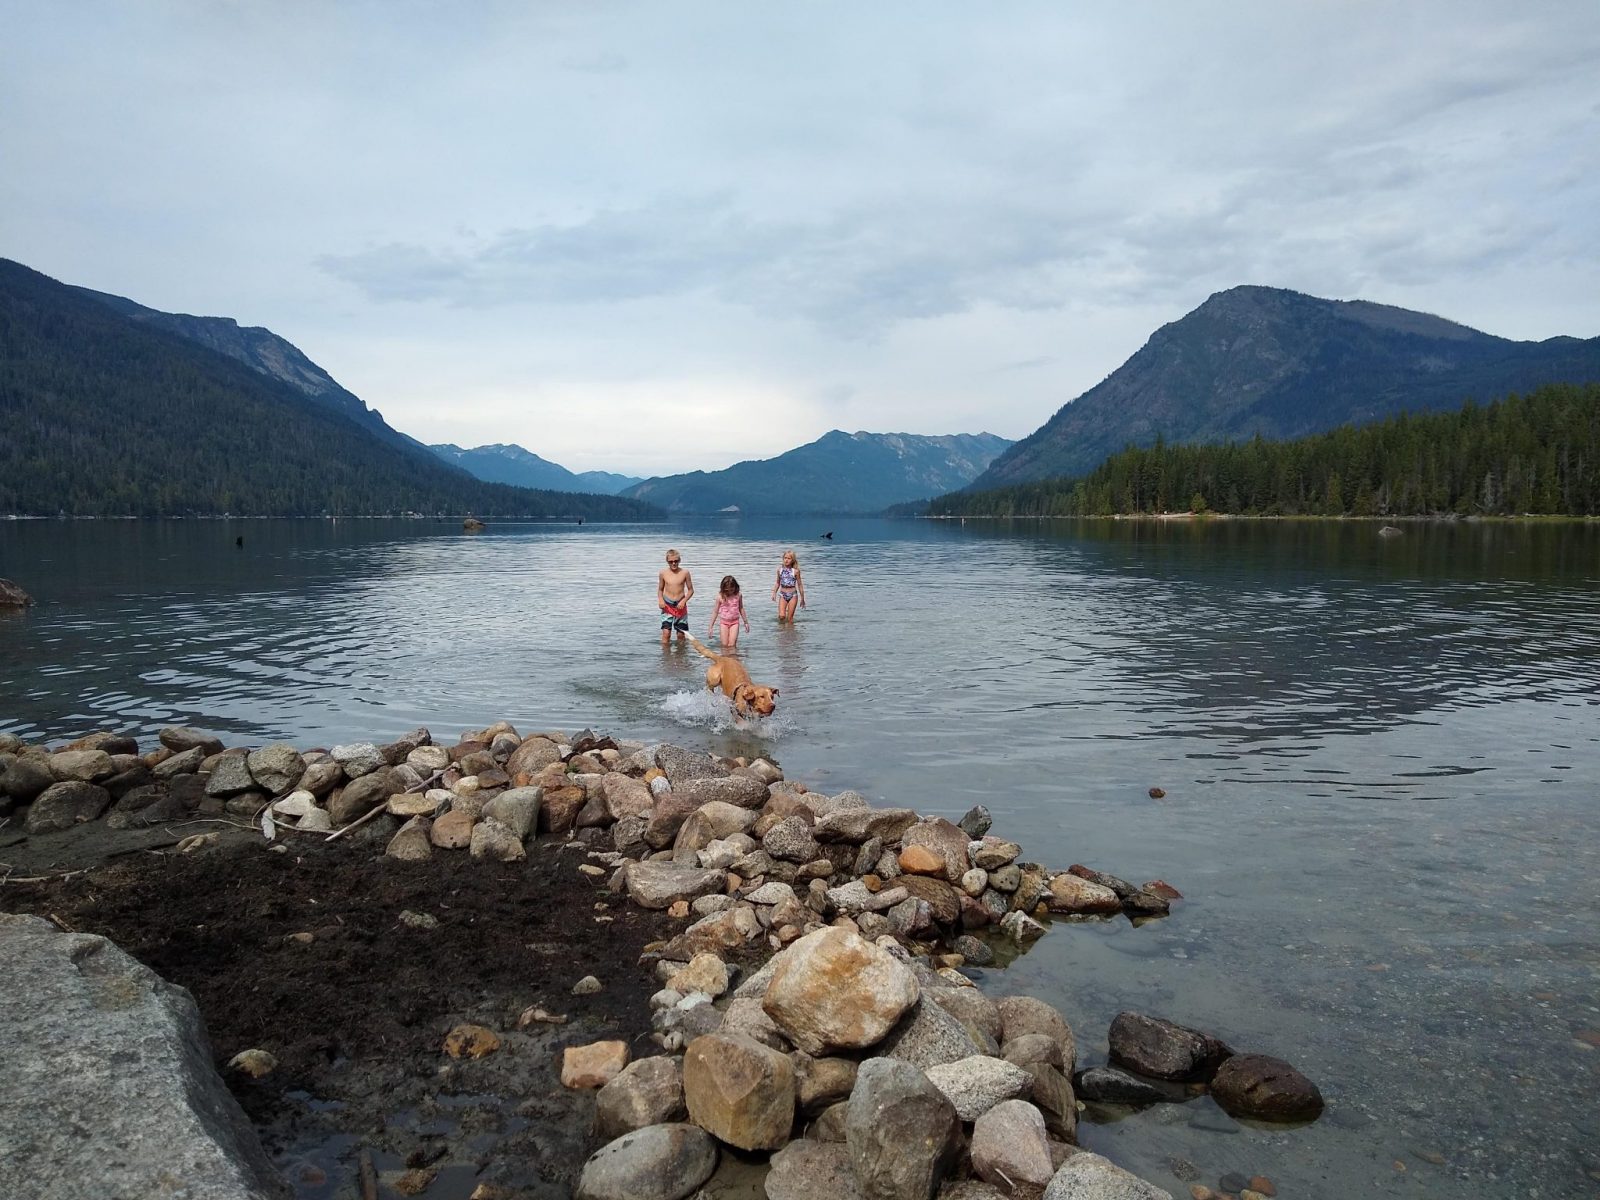 Three kinds and a dog playing in the water at the rocky shore of lake wenatchee on an overcast day. Across the large lake there are forested hillsides and mountains